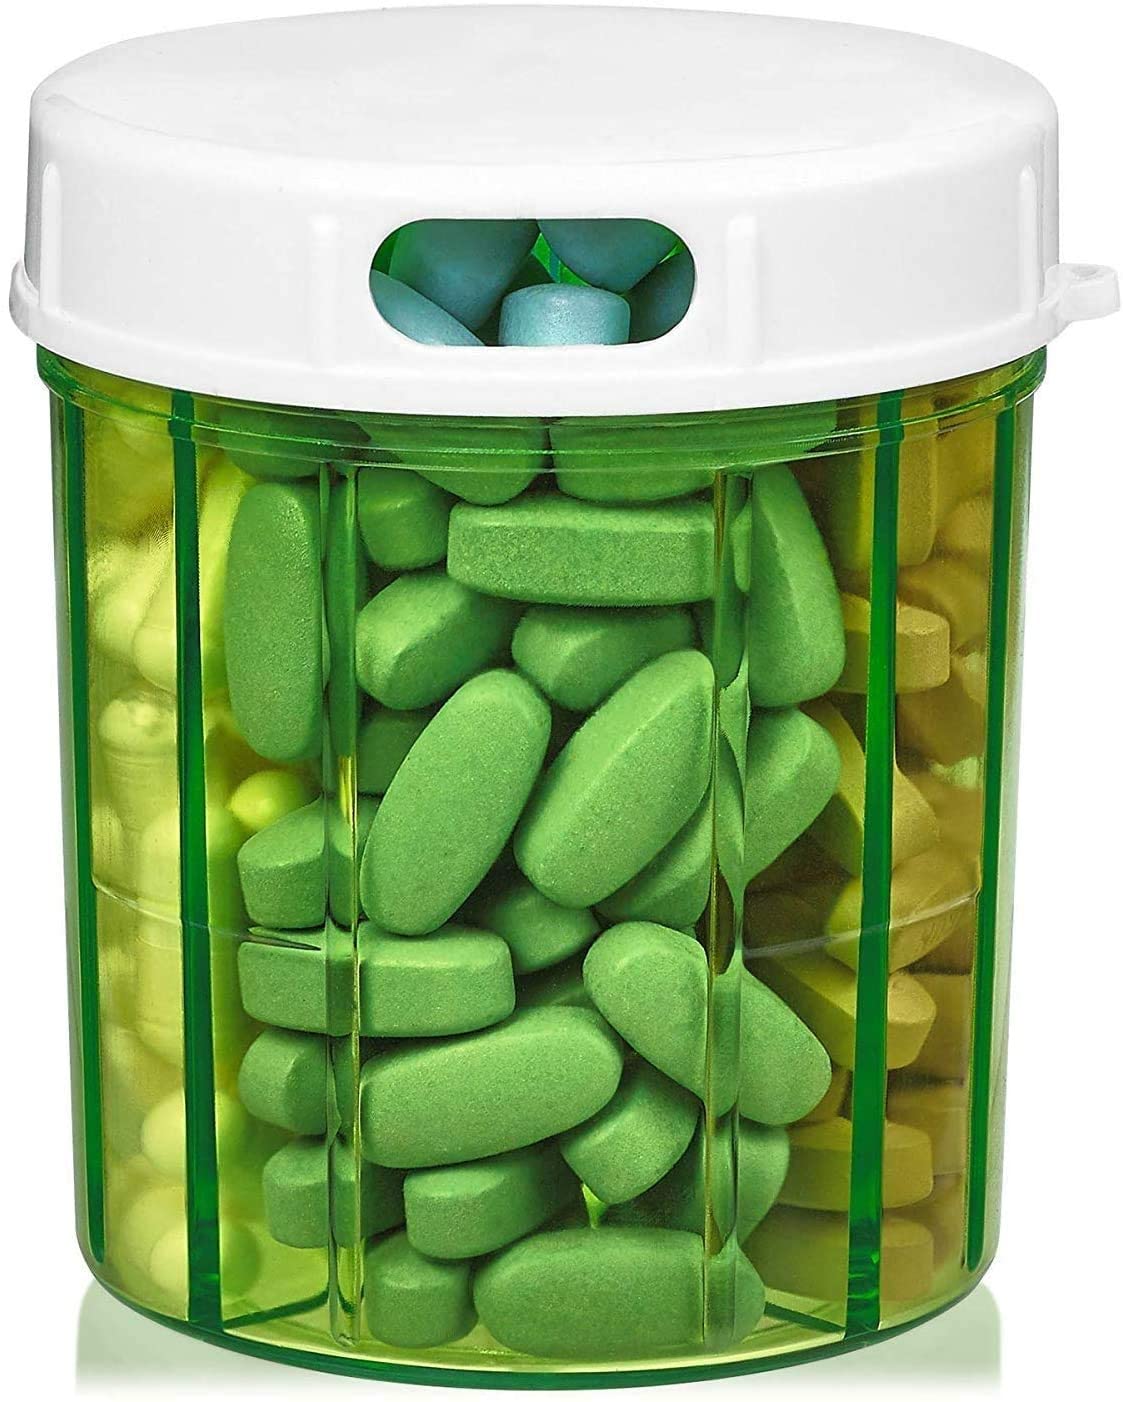 https://carismedic.com/wp-content/uploads/imported/Pill-Organizer-Dispenser-with-4-Compartments-Holder-for-Medication-Vitamins-Supplements-Round-Bottle-Daily-Pill-Case-B07BLNCS34.jpg